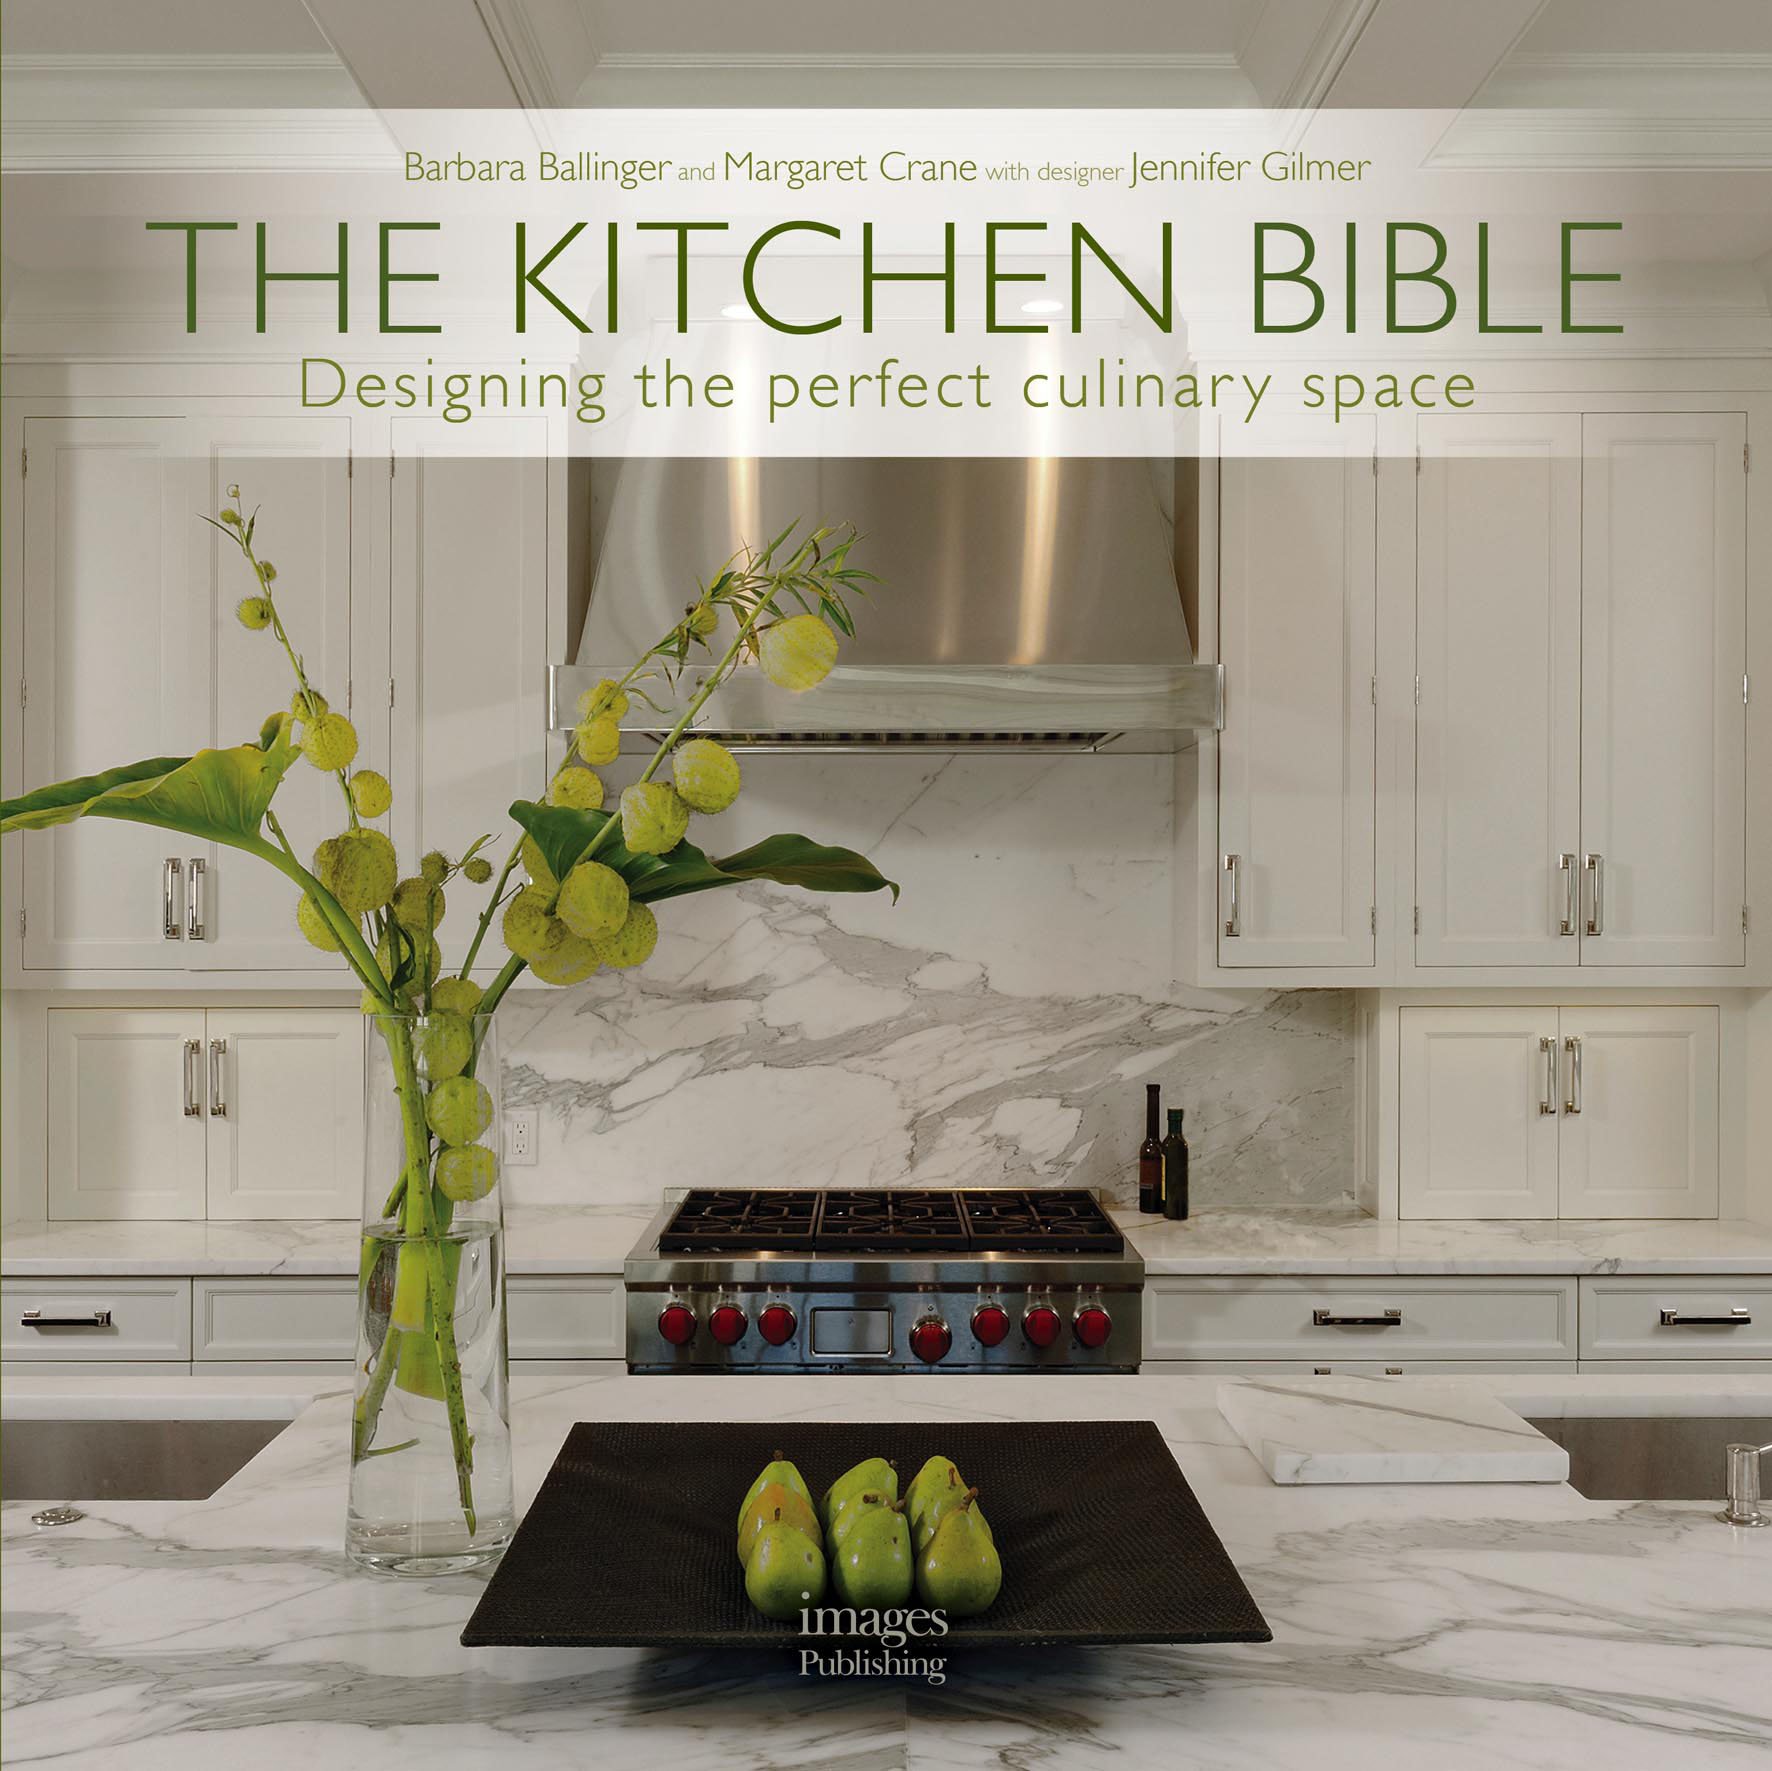 The Kitchen Bible: Designing the Perfect Culinary Space